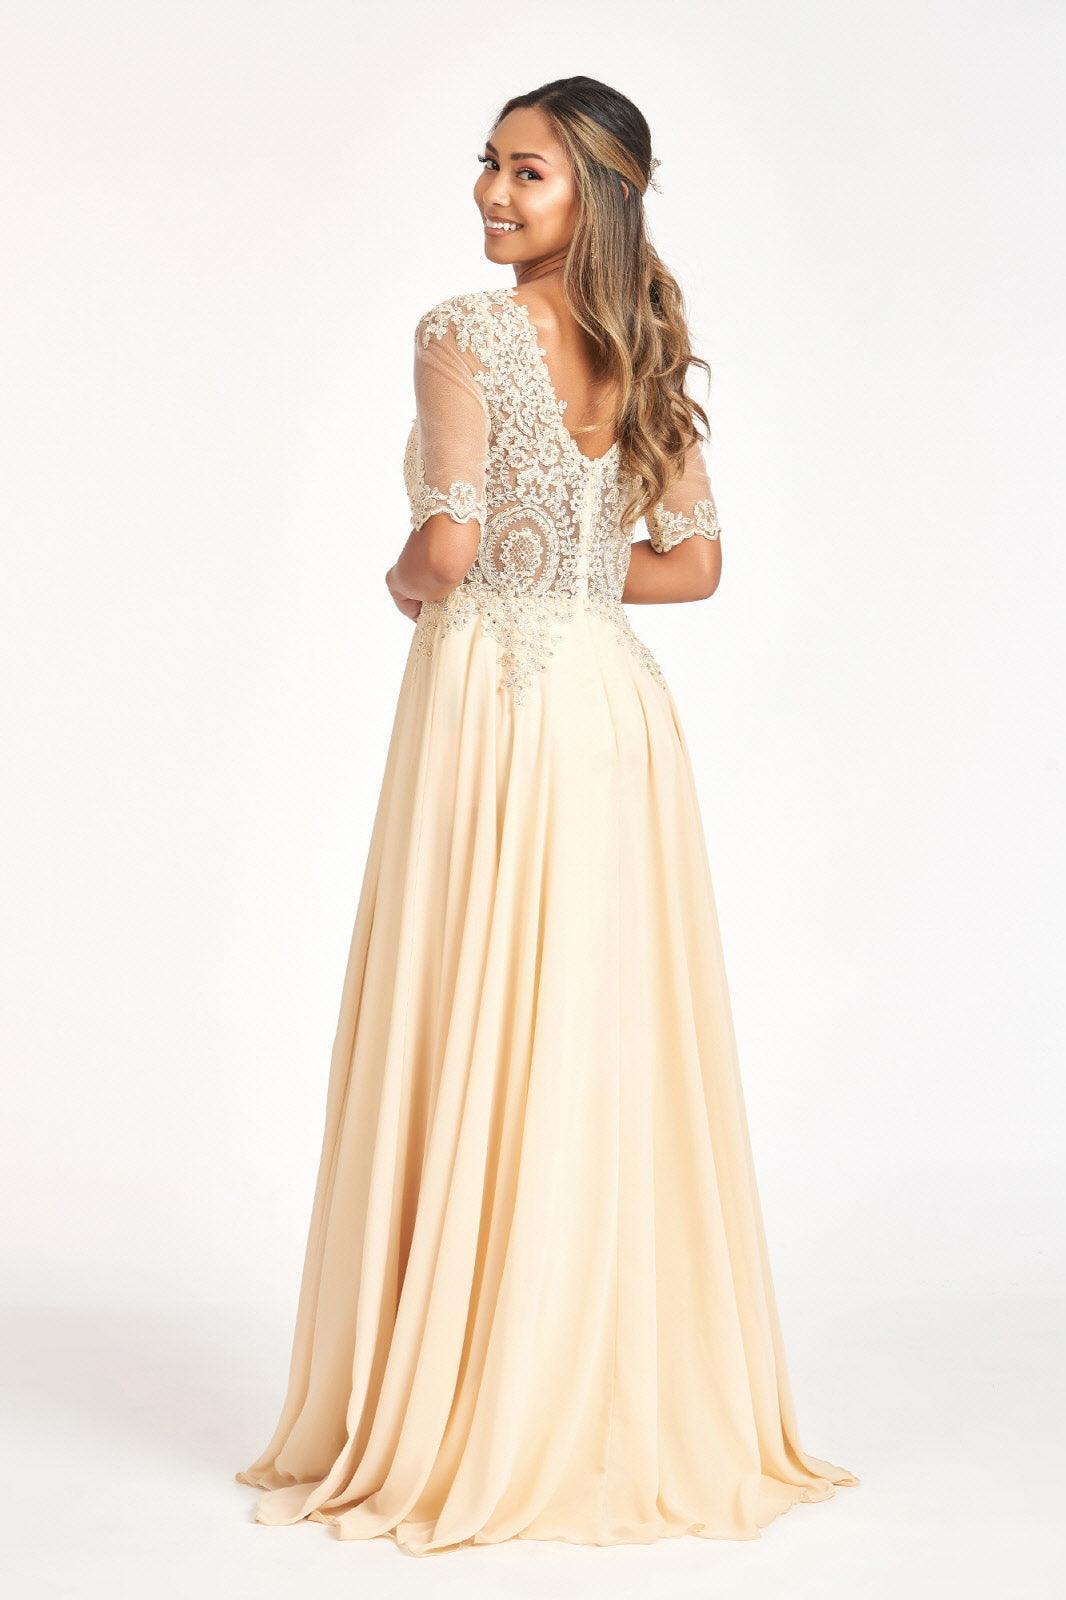 Formal Long Mother of the Bride Dress Sale - The Dress Outlet